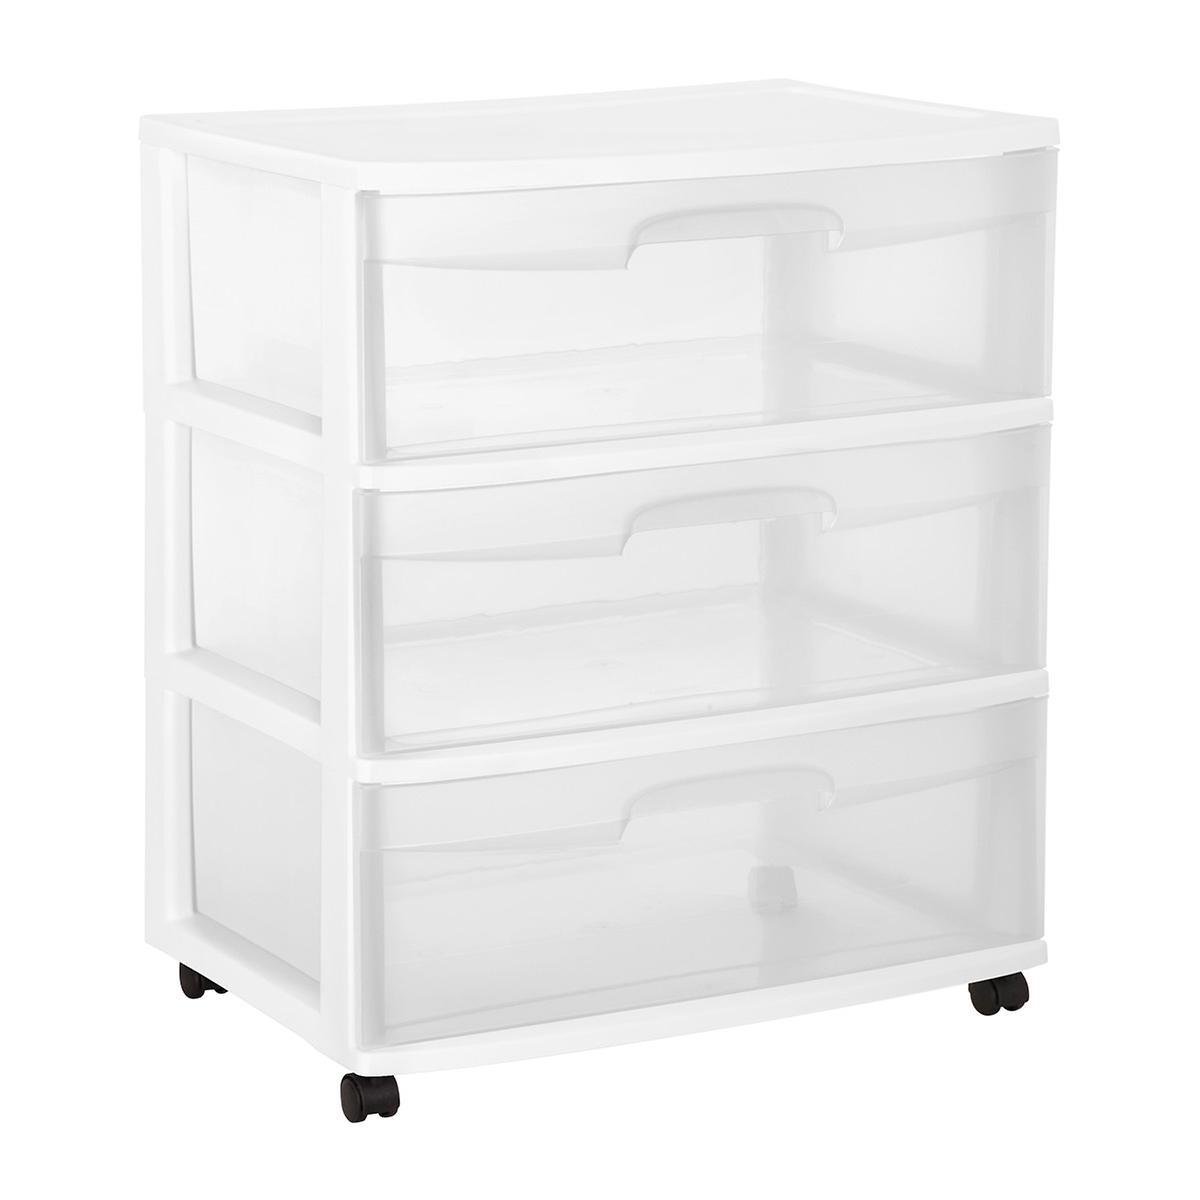 Sterilite Wide 3 Drawer Chest With Wheels The Container Store